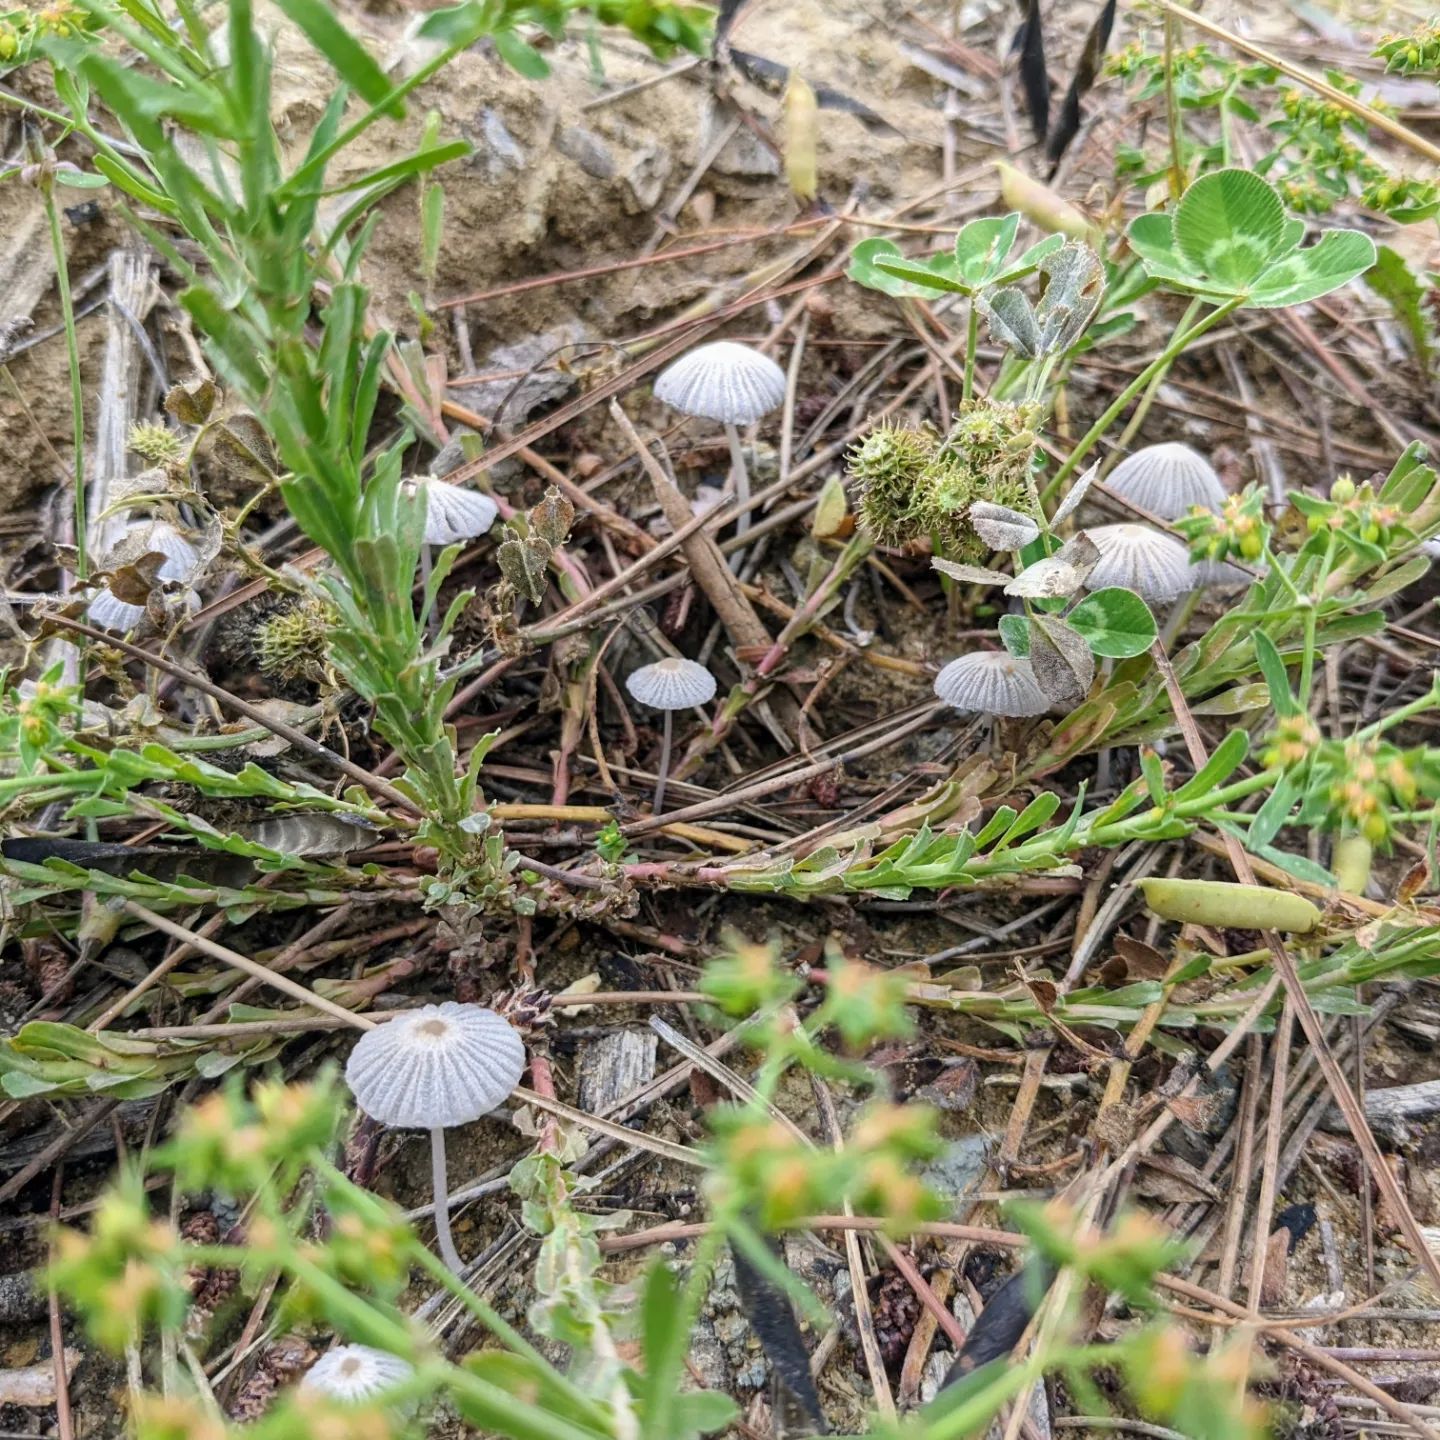 The #irrigation brought out the #mushrooms